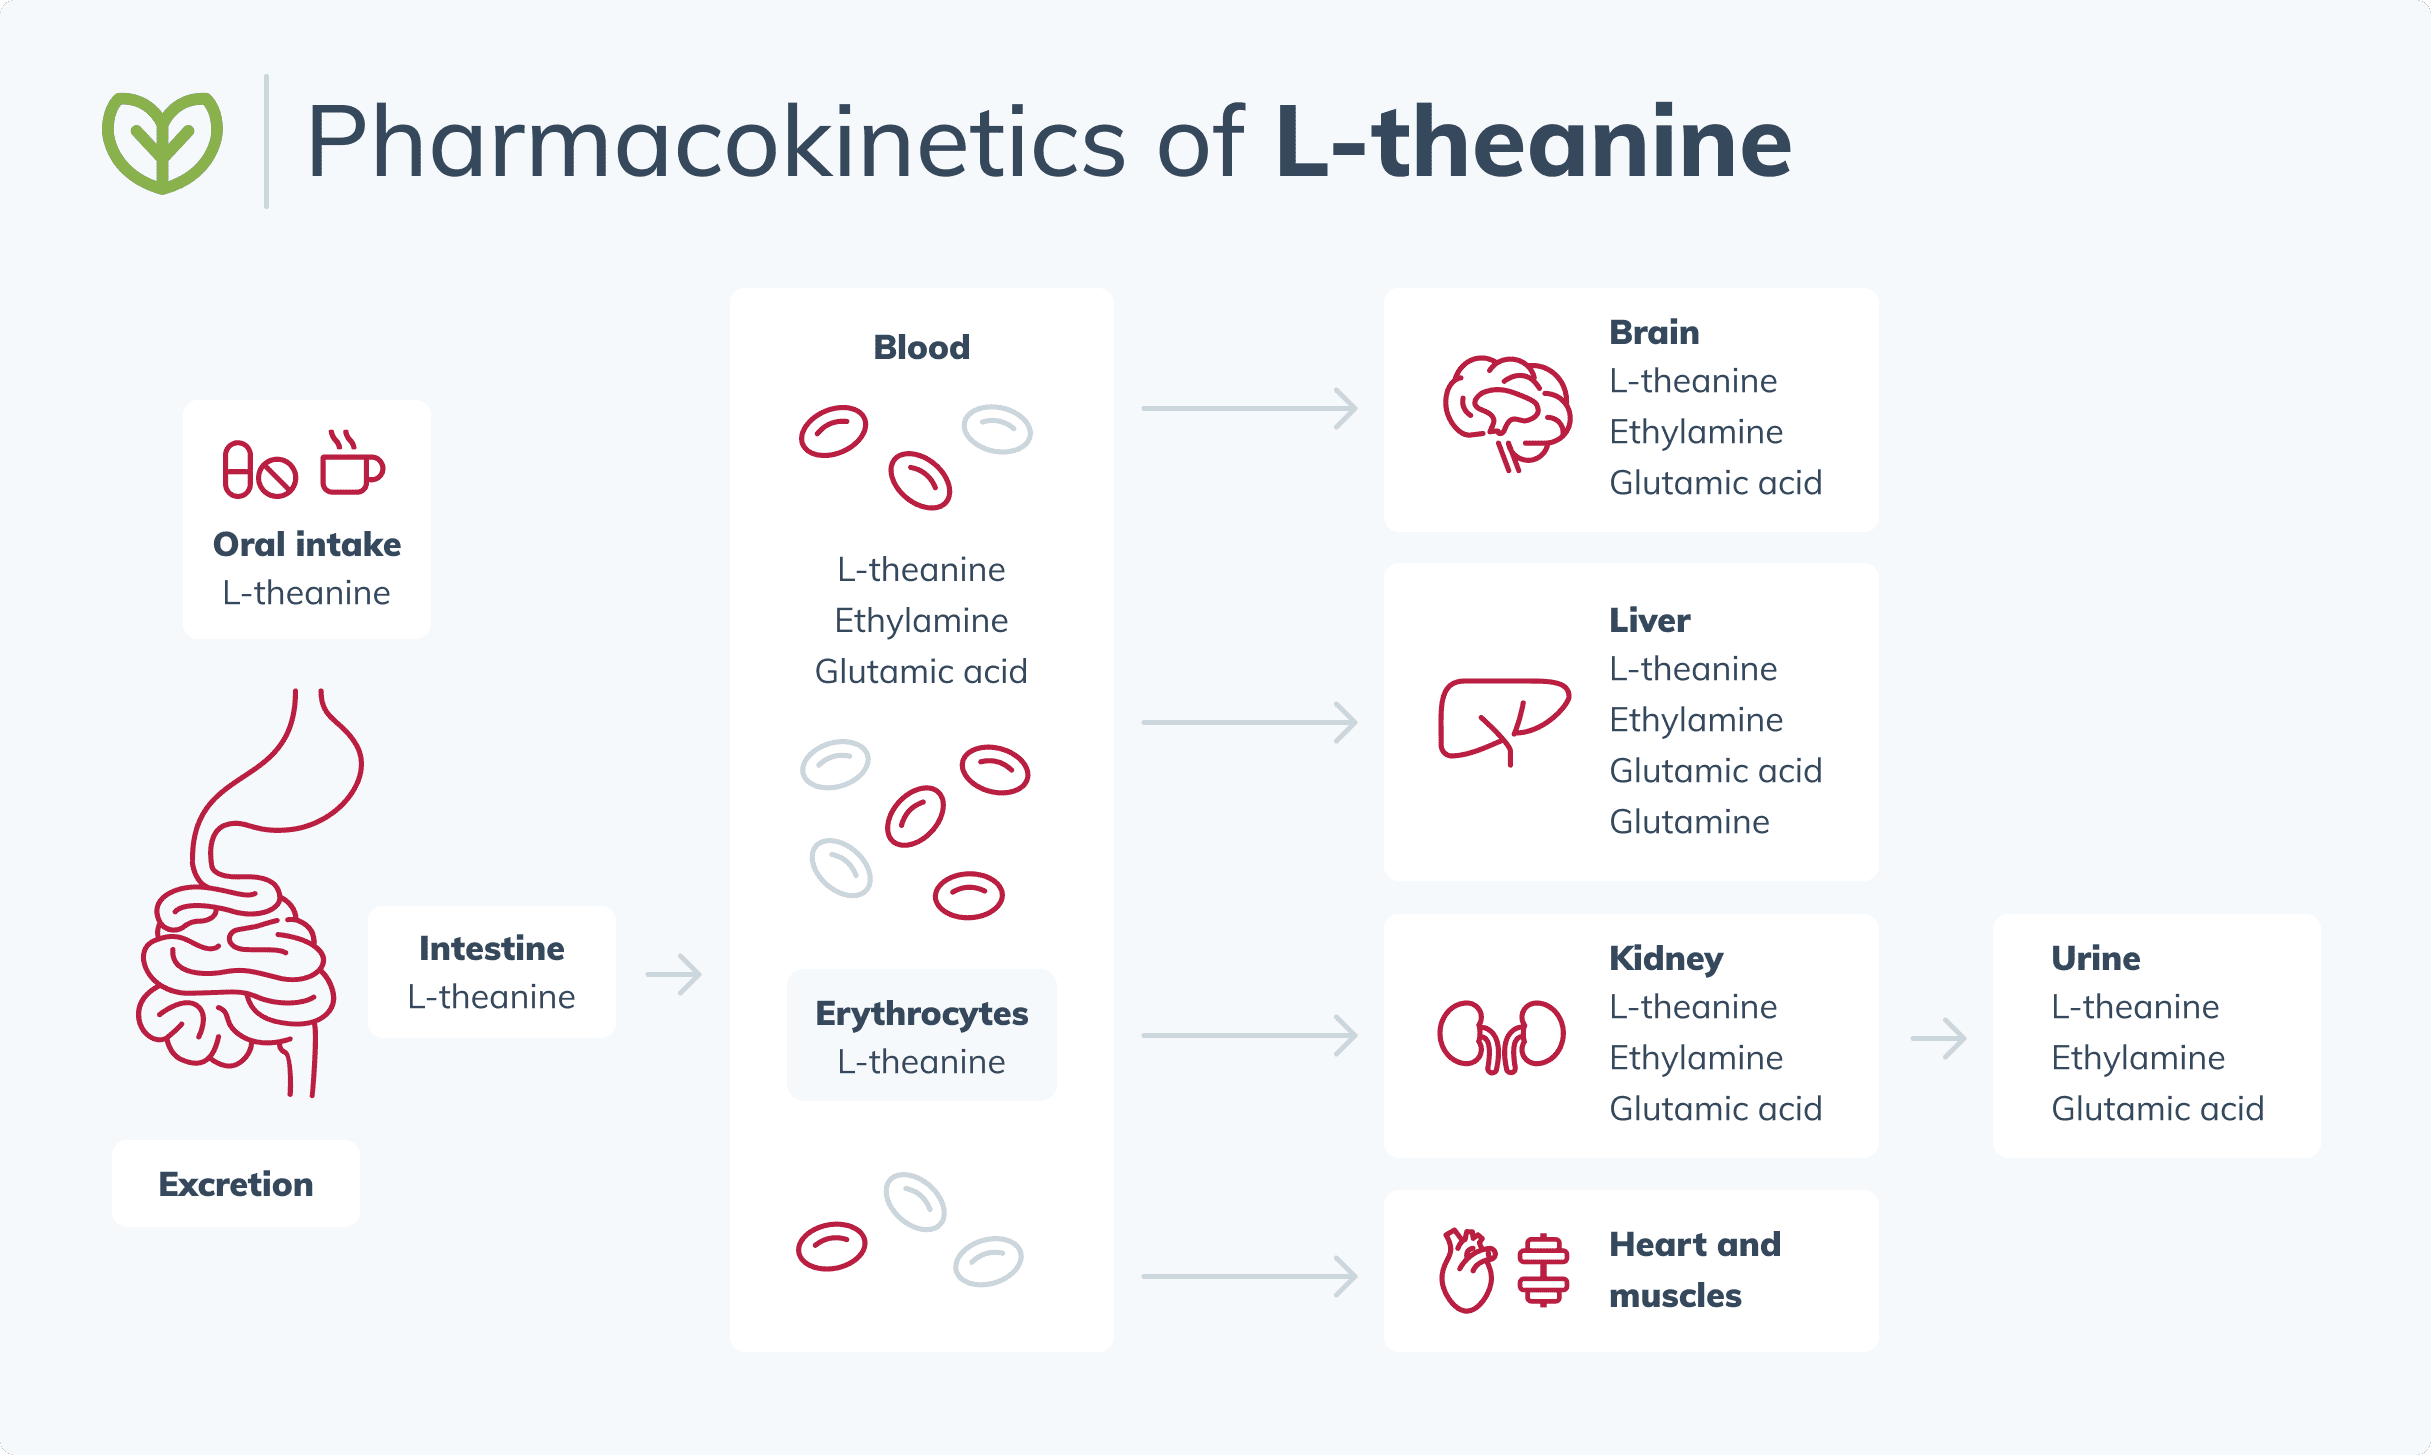 picture of the pharmacokinetics of L-theanine